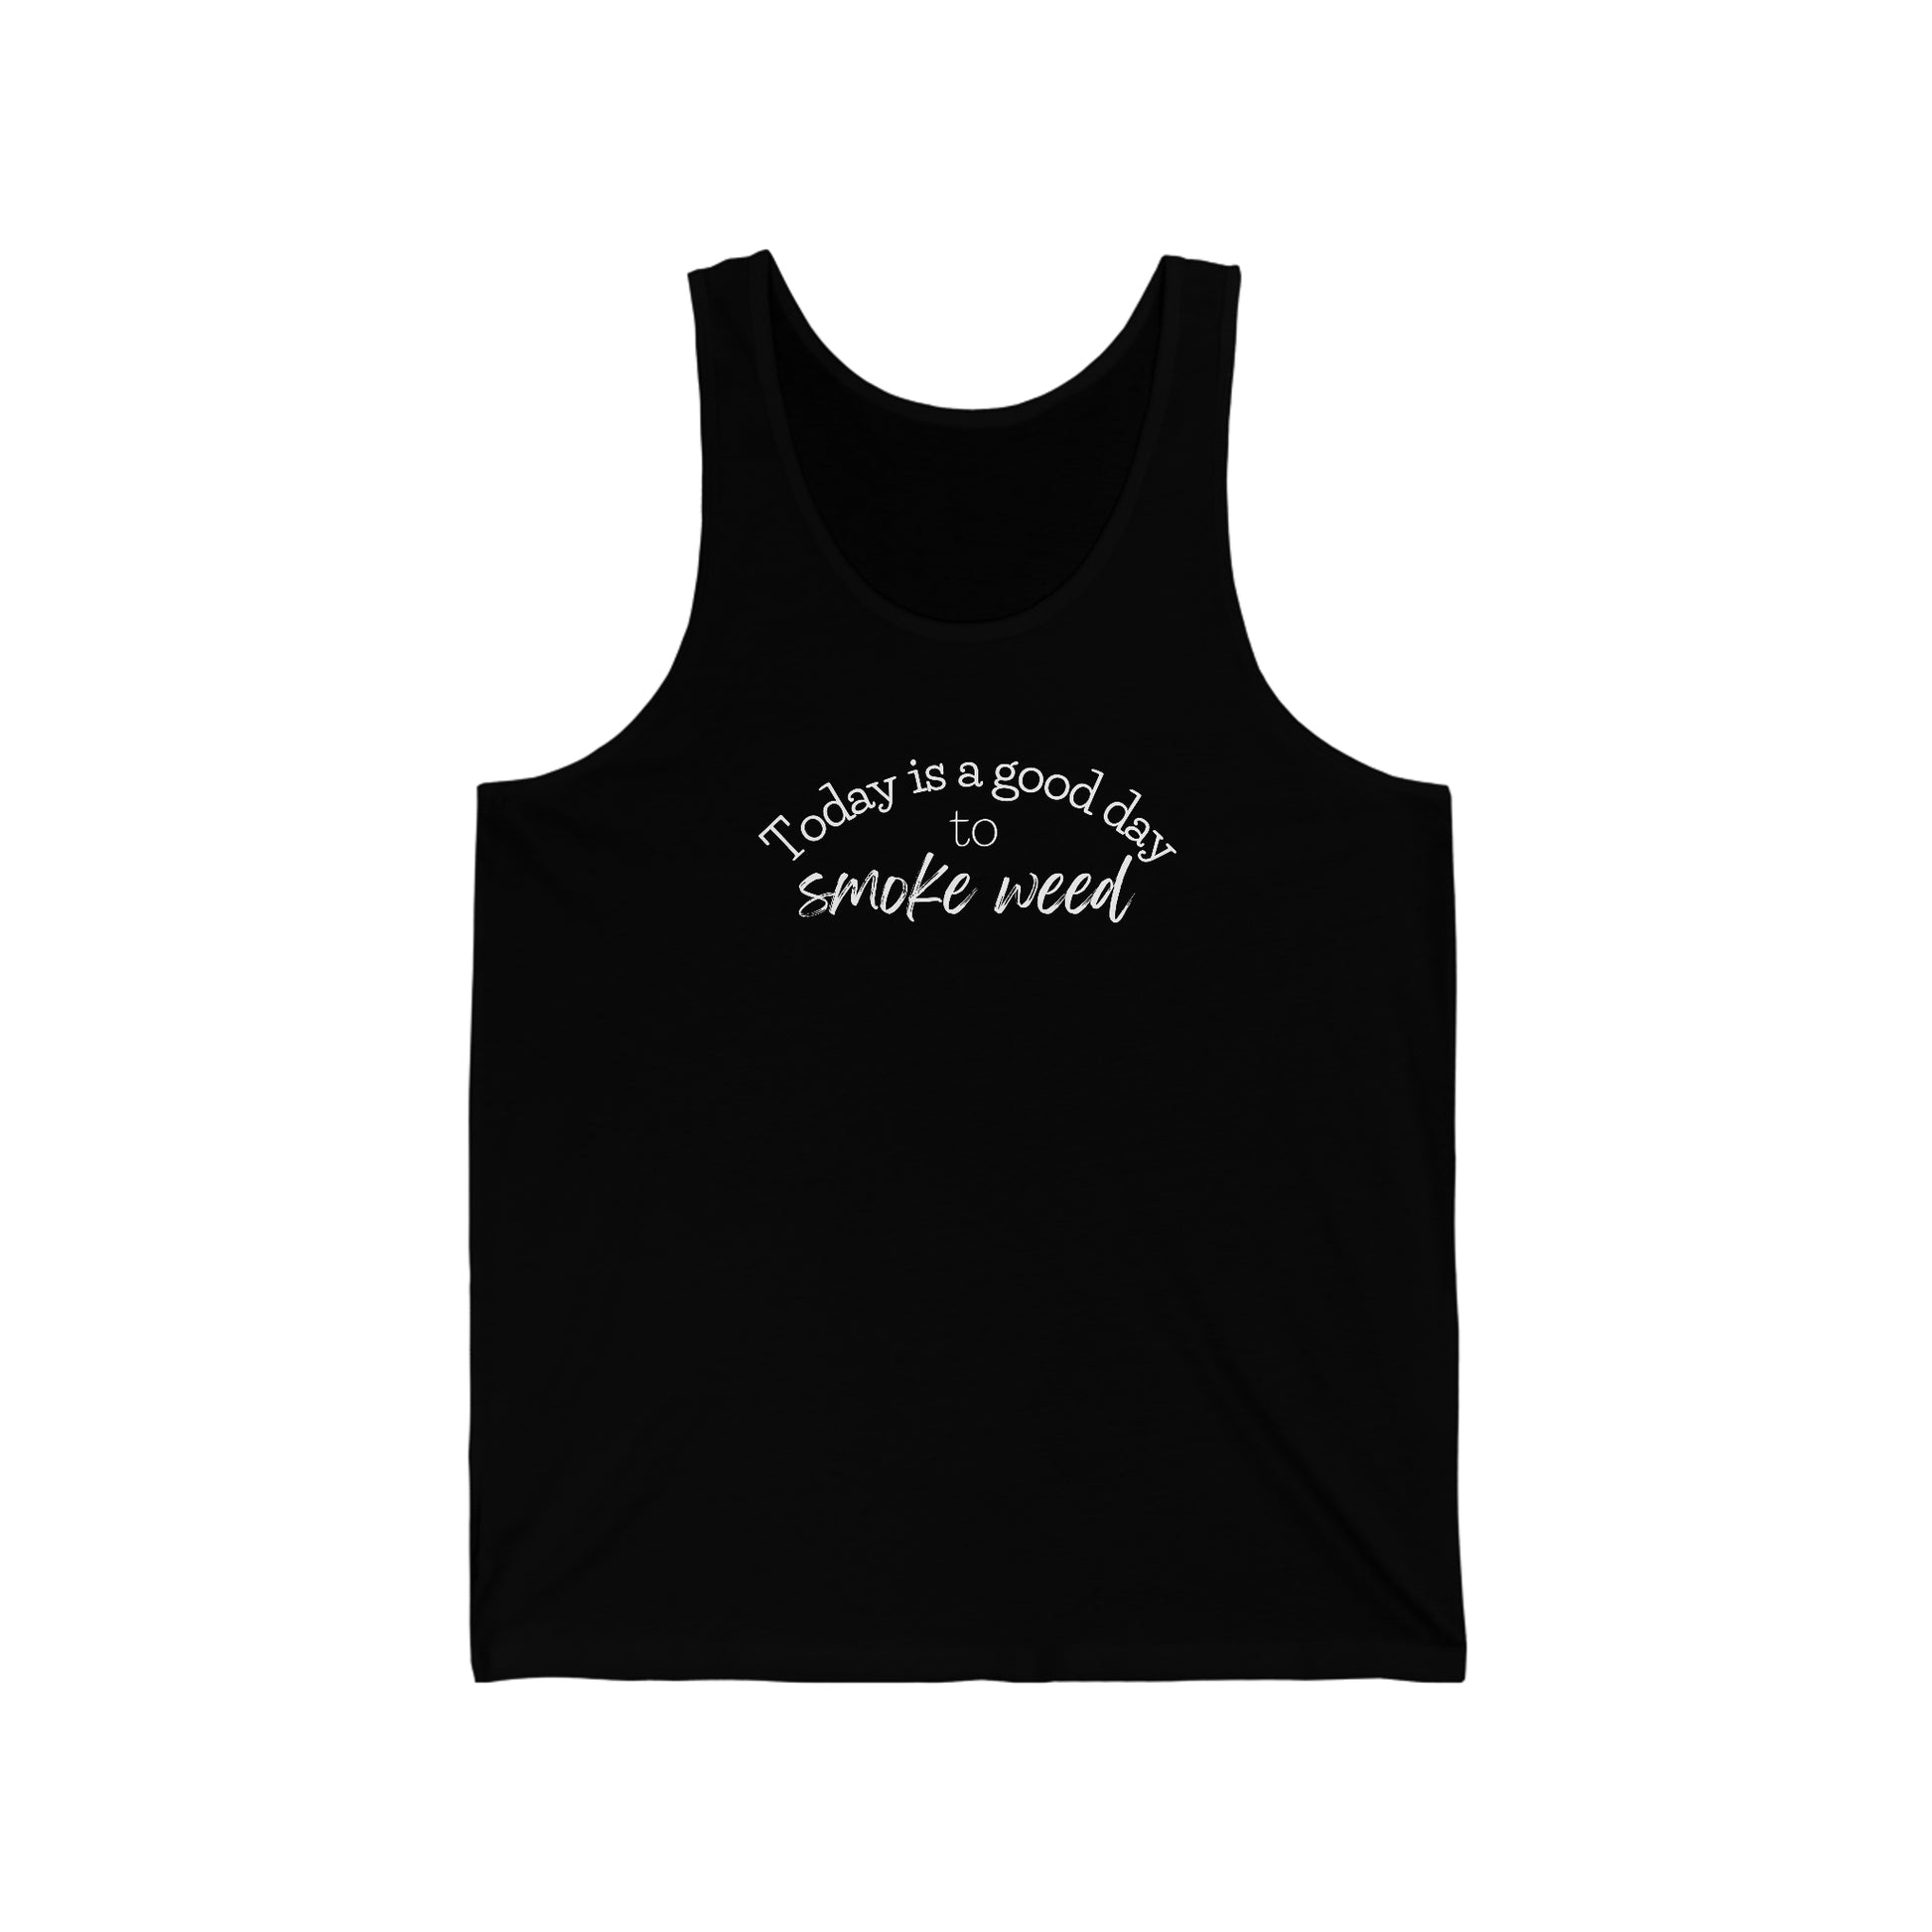 Black unisex jersey tank top with the text "Today is a Good Day to Smoke Weed Cannabis Tank Top" printed in white on the front.